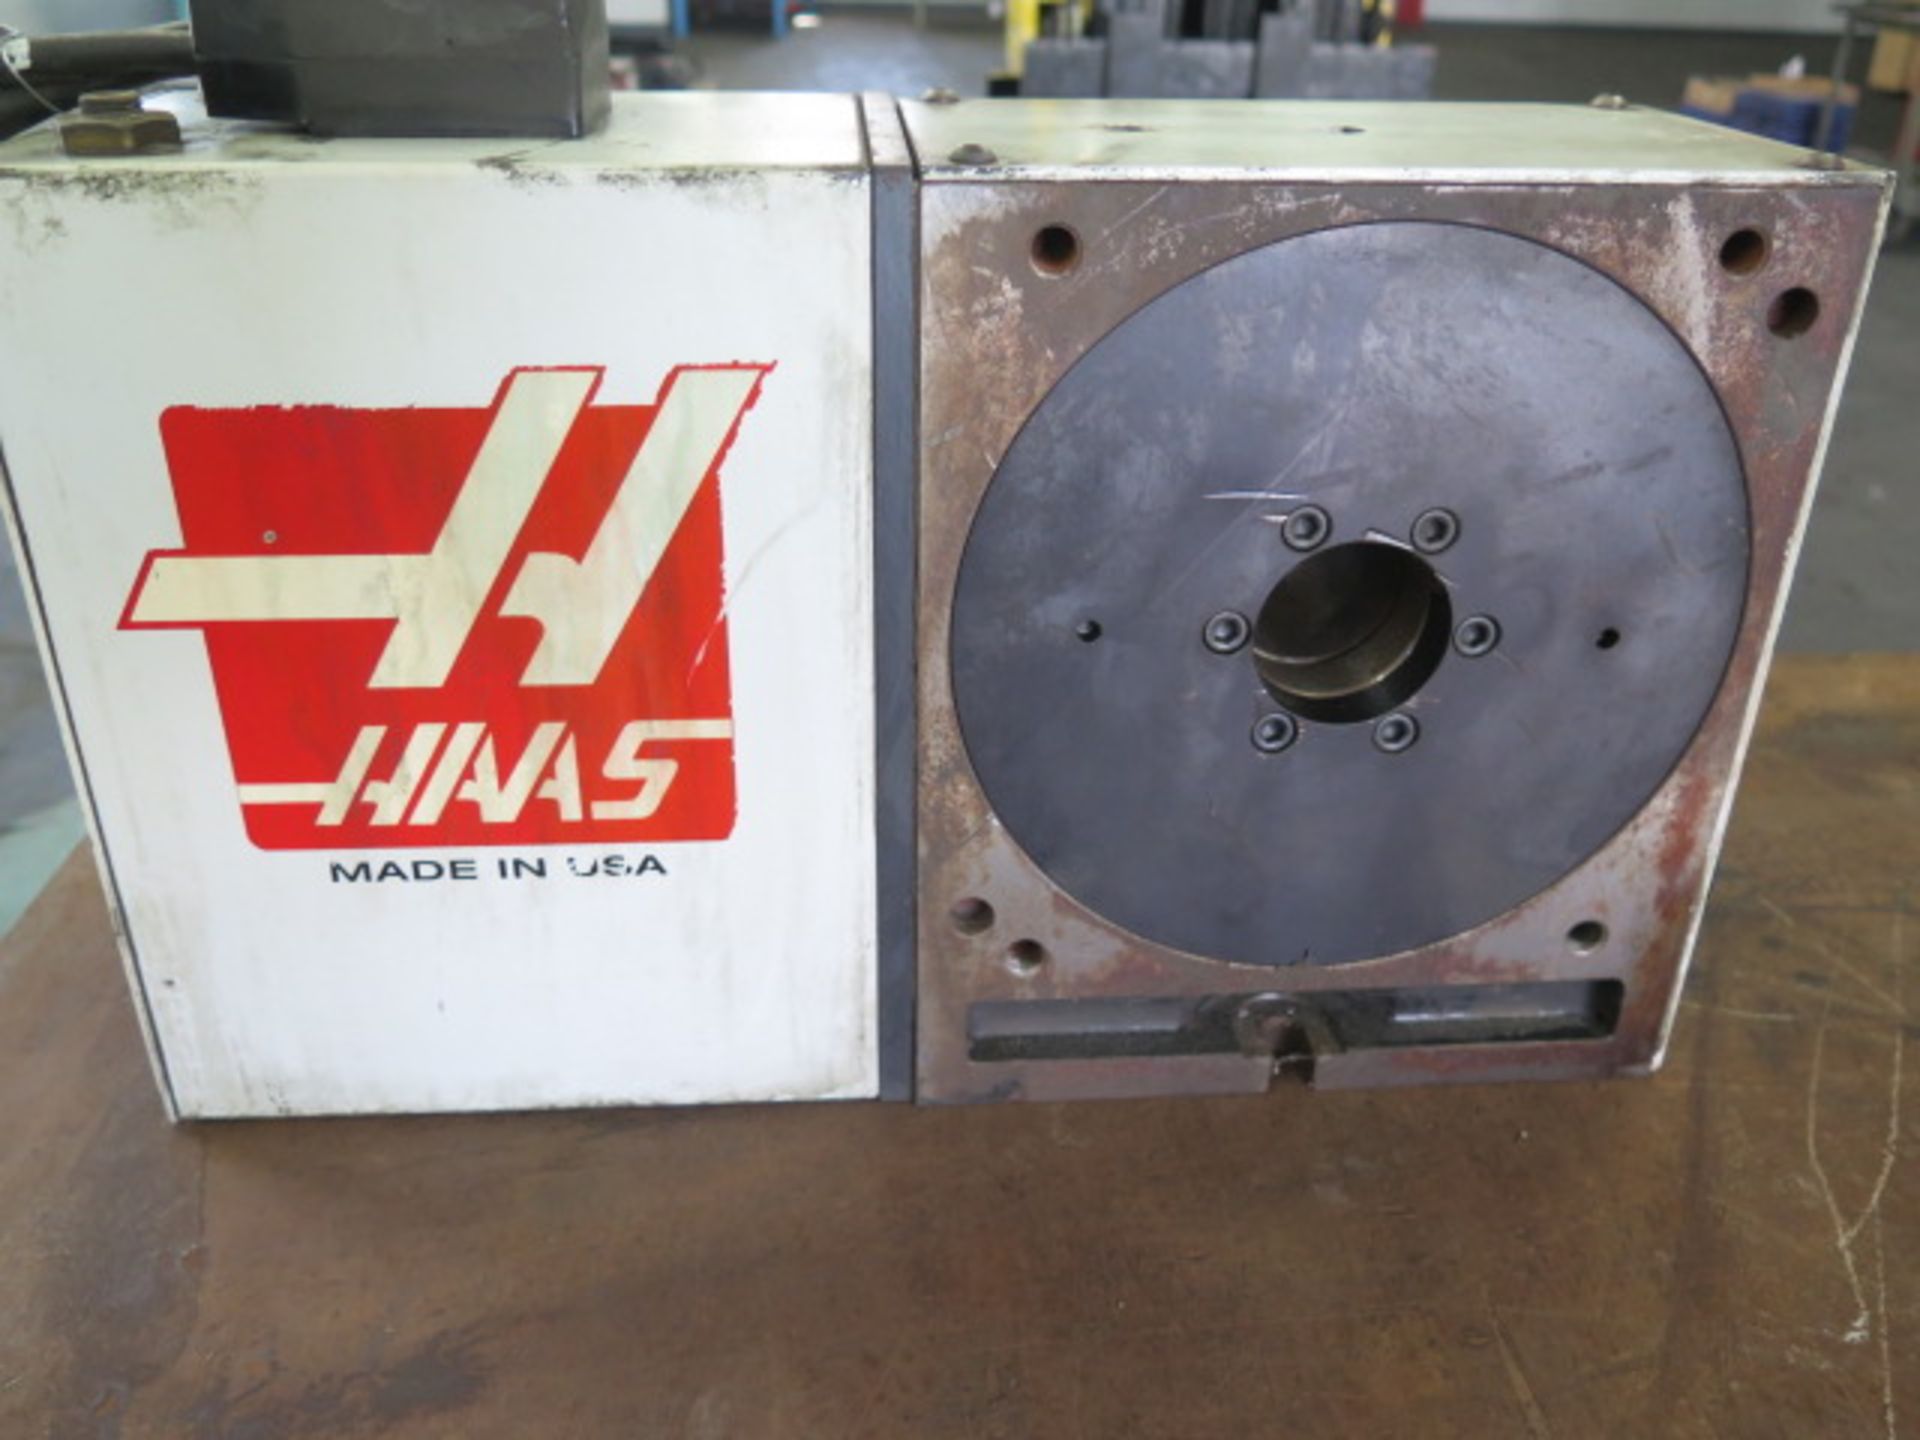 Haas HRT210H 8” 4th Axis Rotary Indexer s/n 220175 - Image 4 of 8